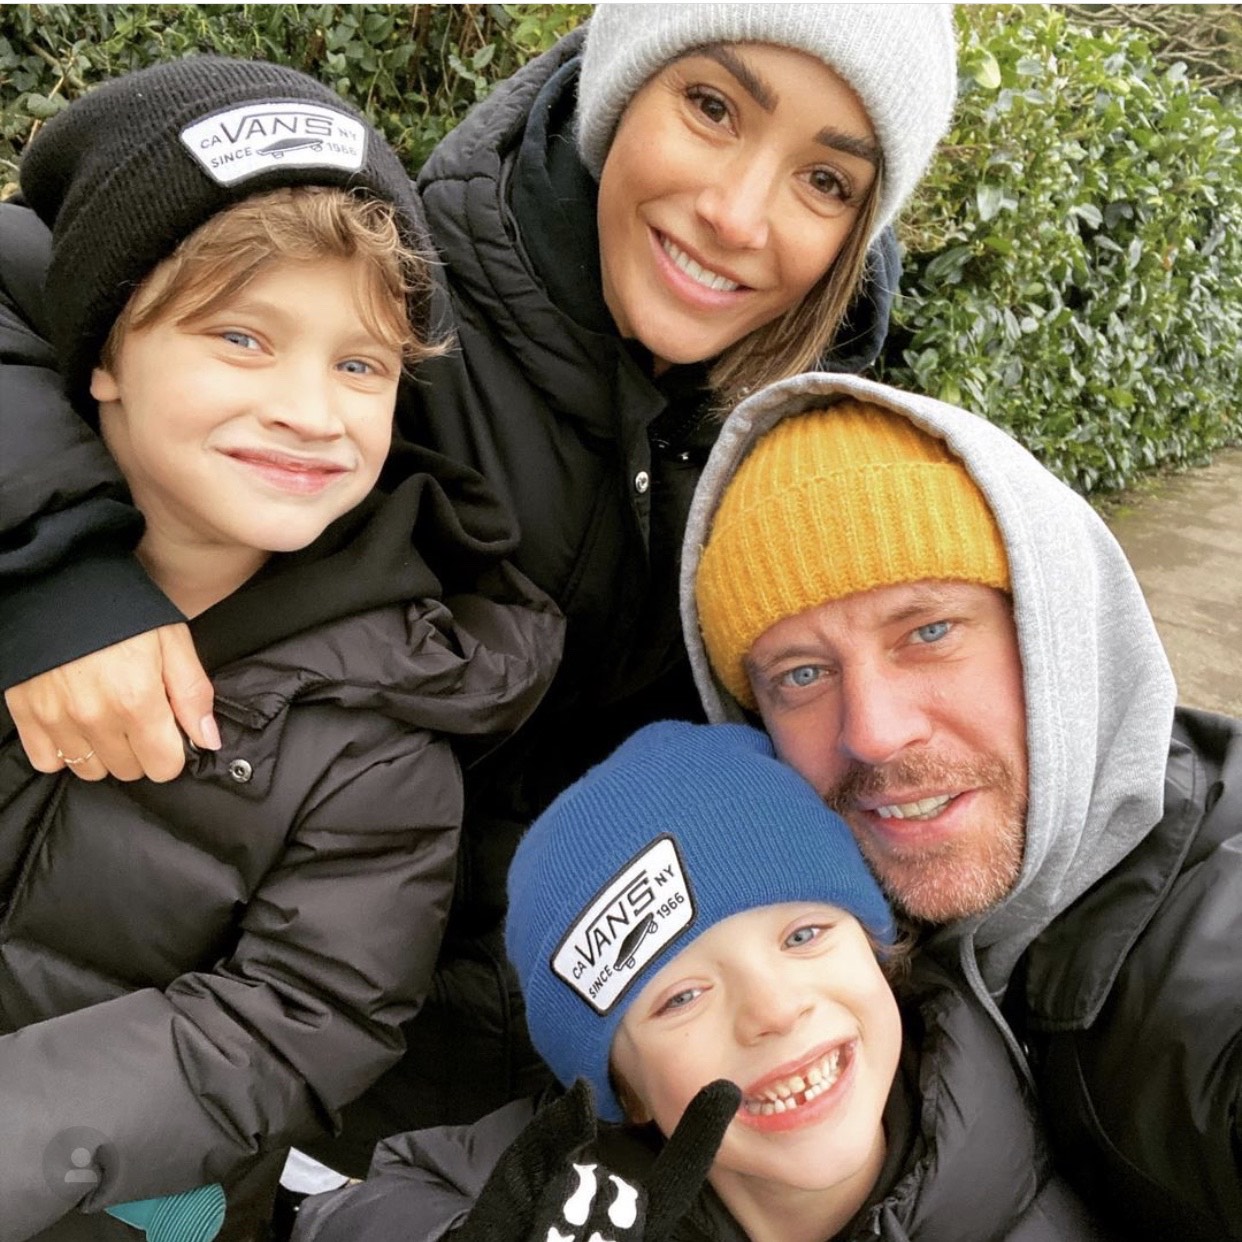 Frankie Bridge reveals her family walks around fully naked at home as she opens up about baring all